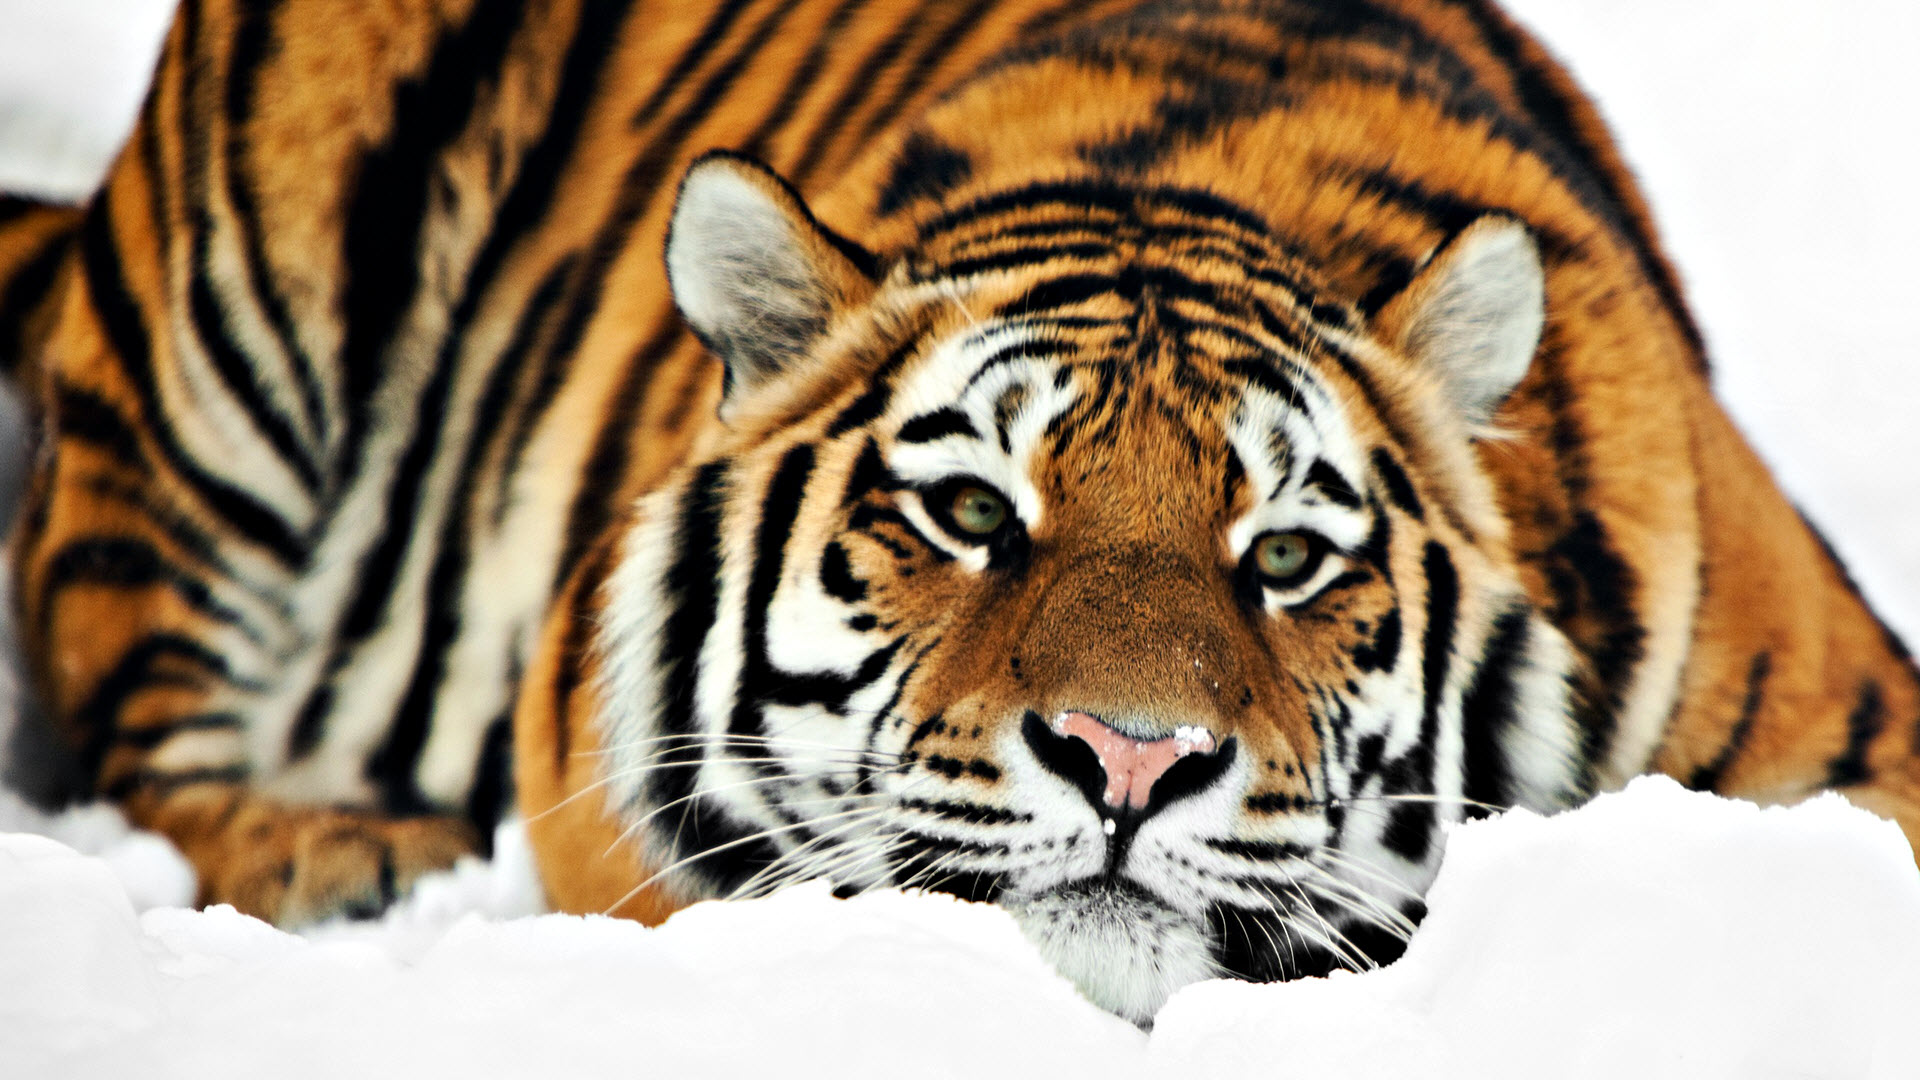 Desktop pictures of animated tigers wallpaper 3d hd pictures.